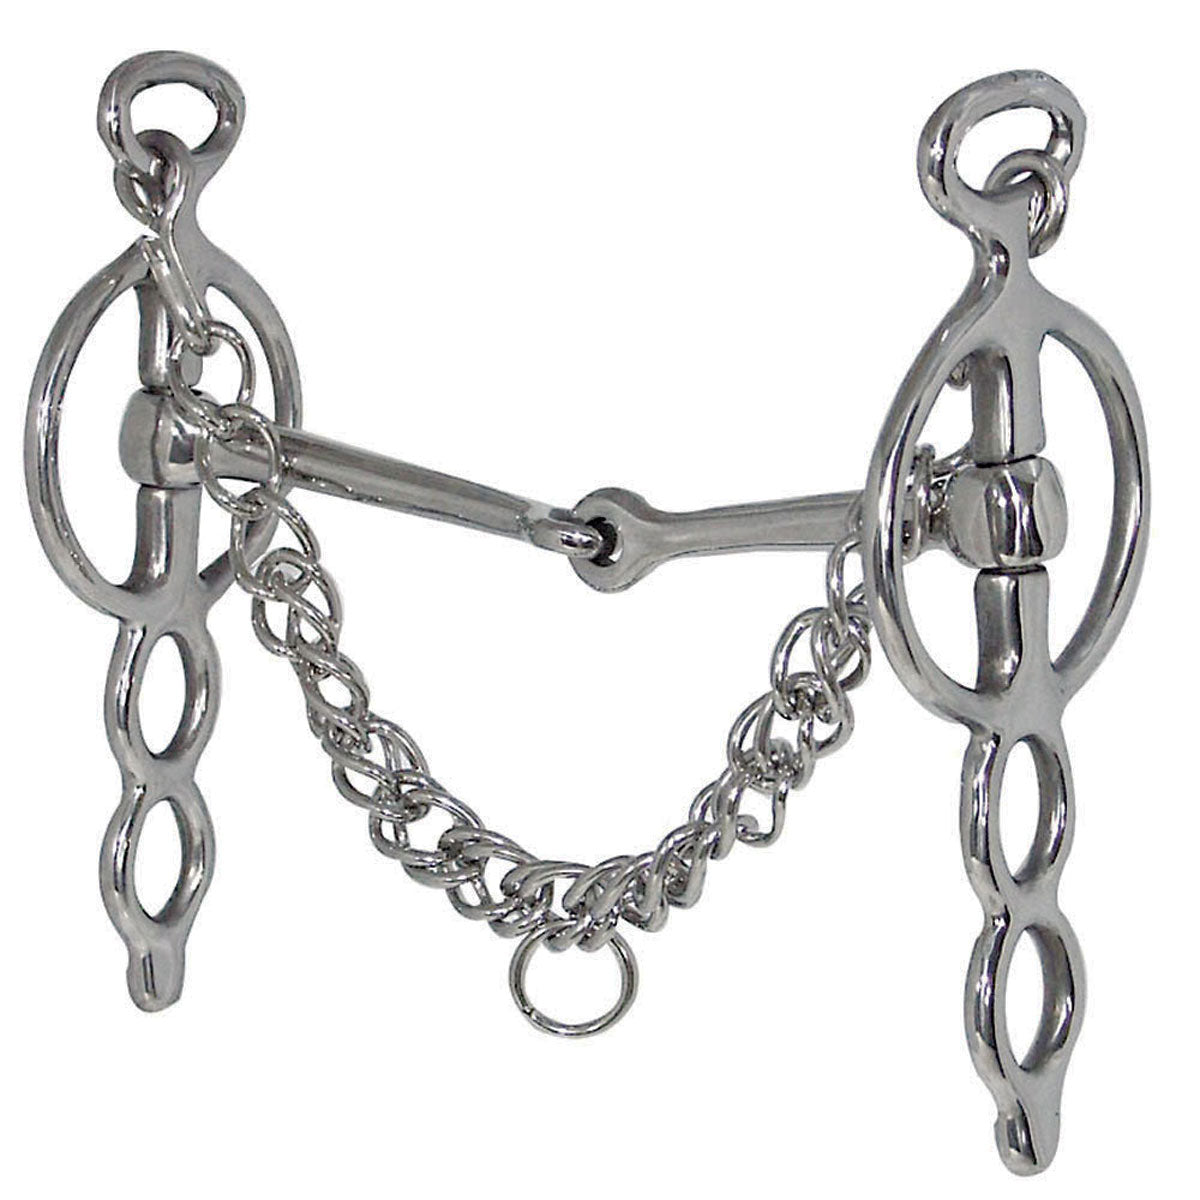 Coronet Fancy Liverpool Snaffle Mouth Driving Bit